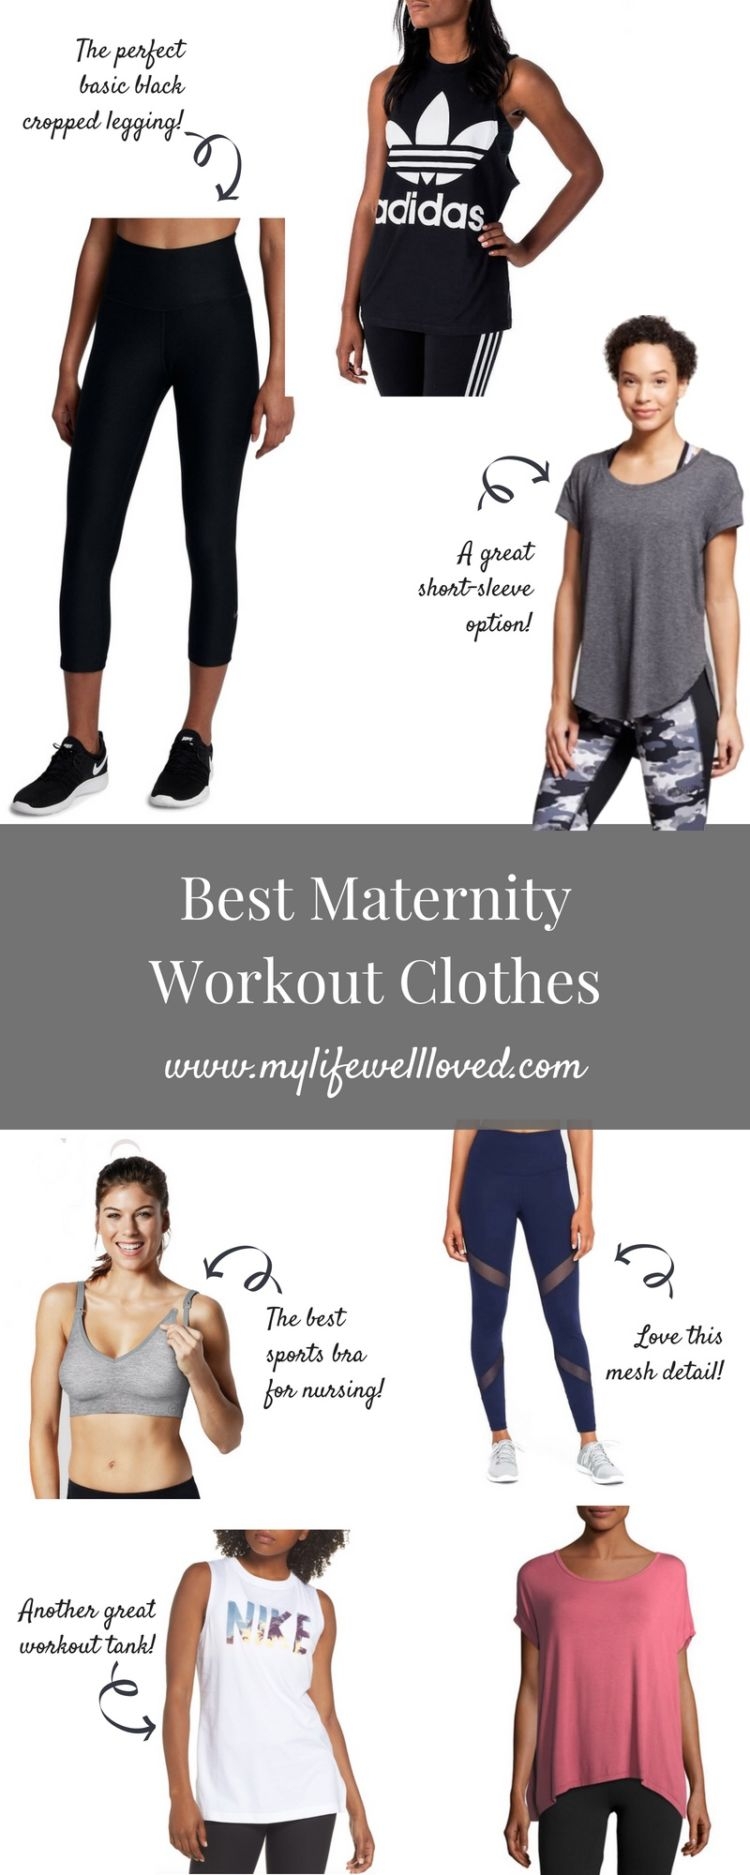 The Best Maternity Workout Clothes - My 